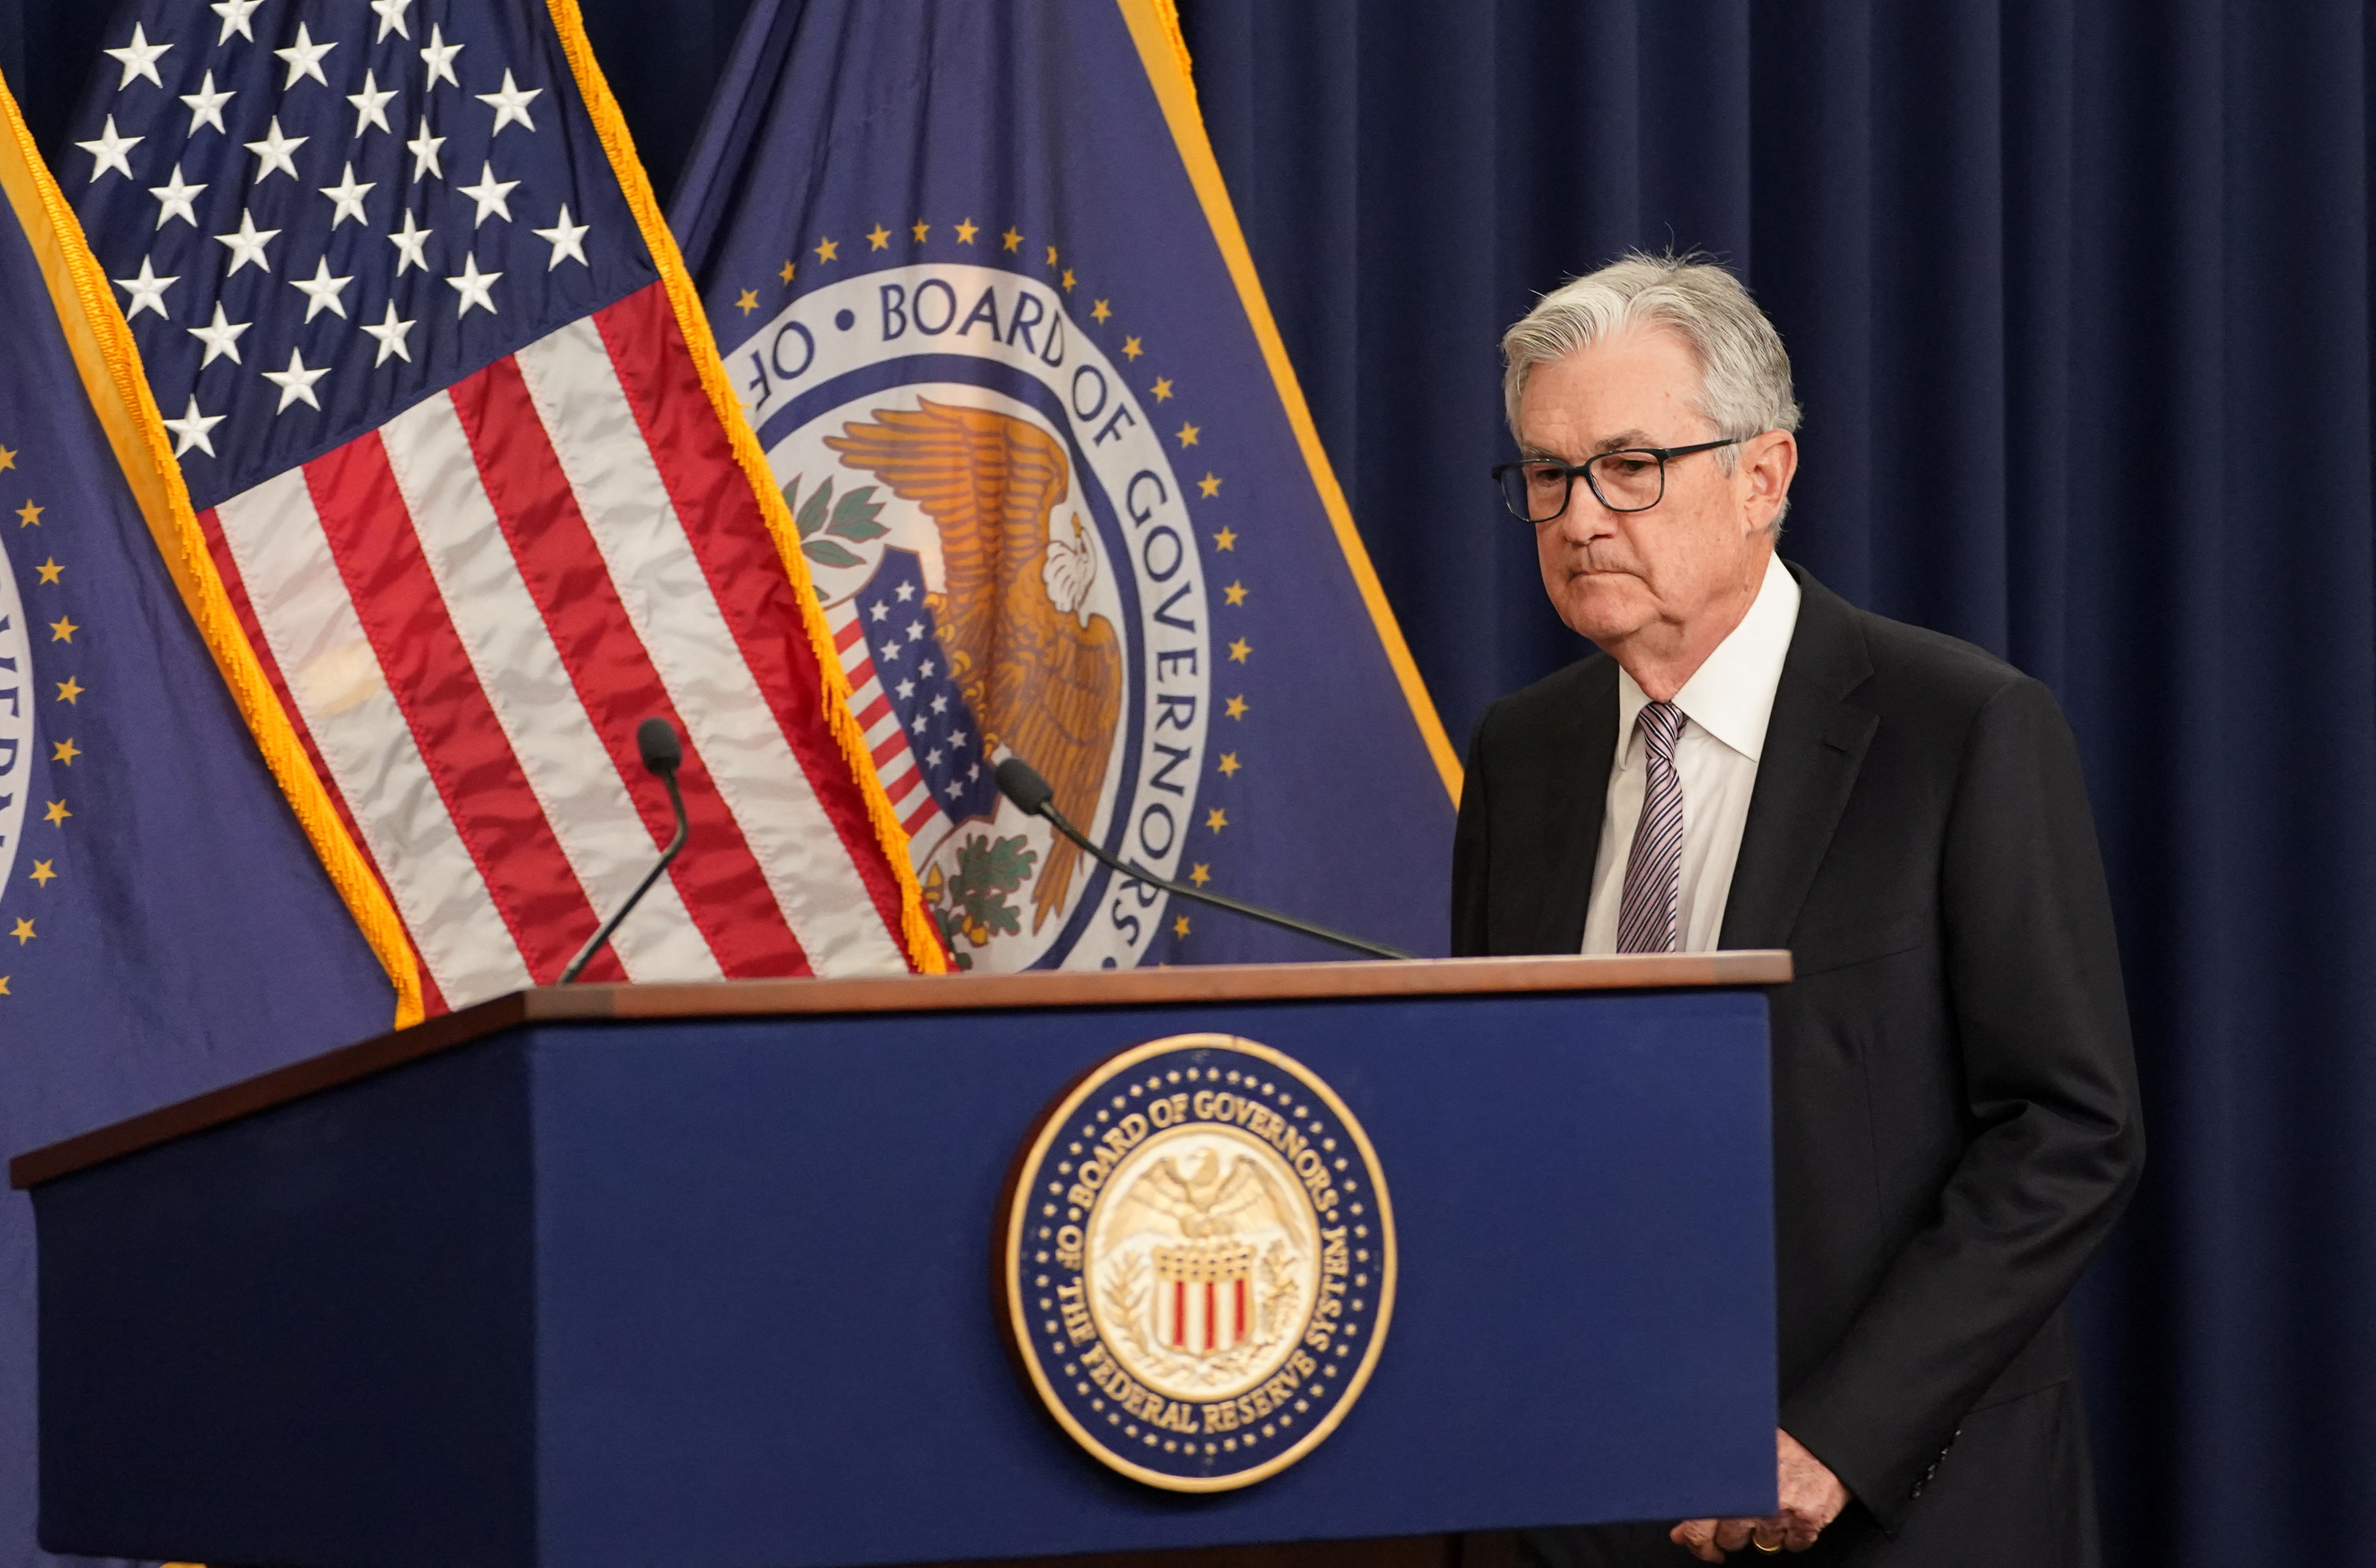 Federal Reserve Chairman Powell holds a press conference in Washington